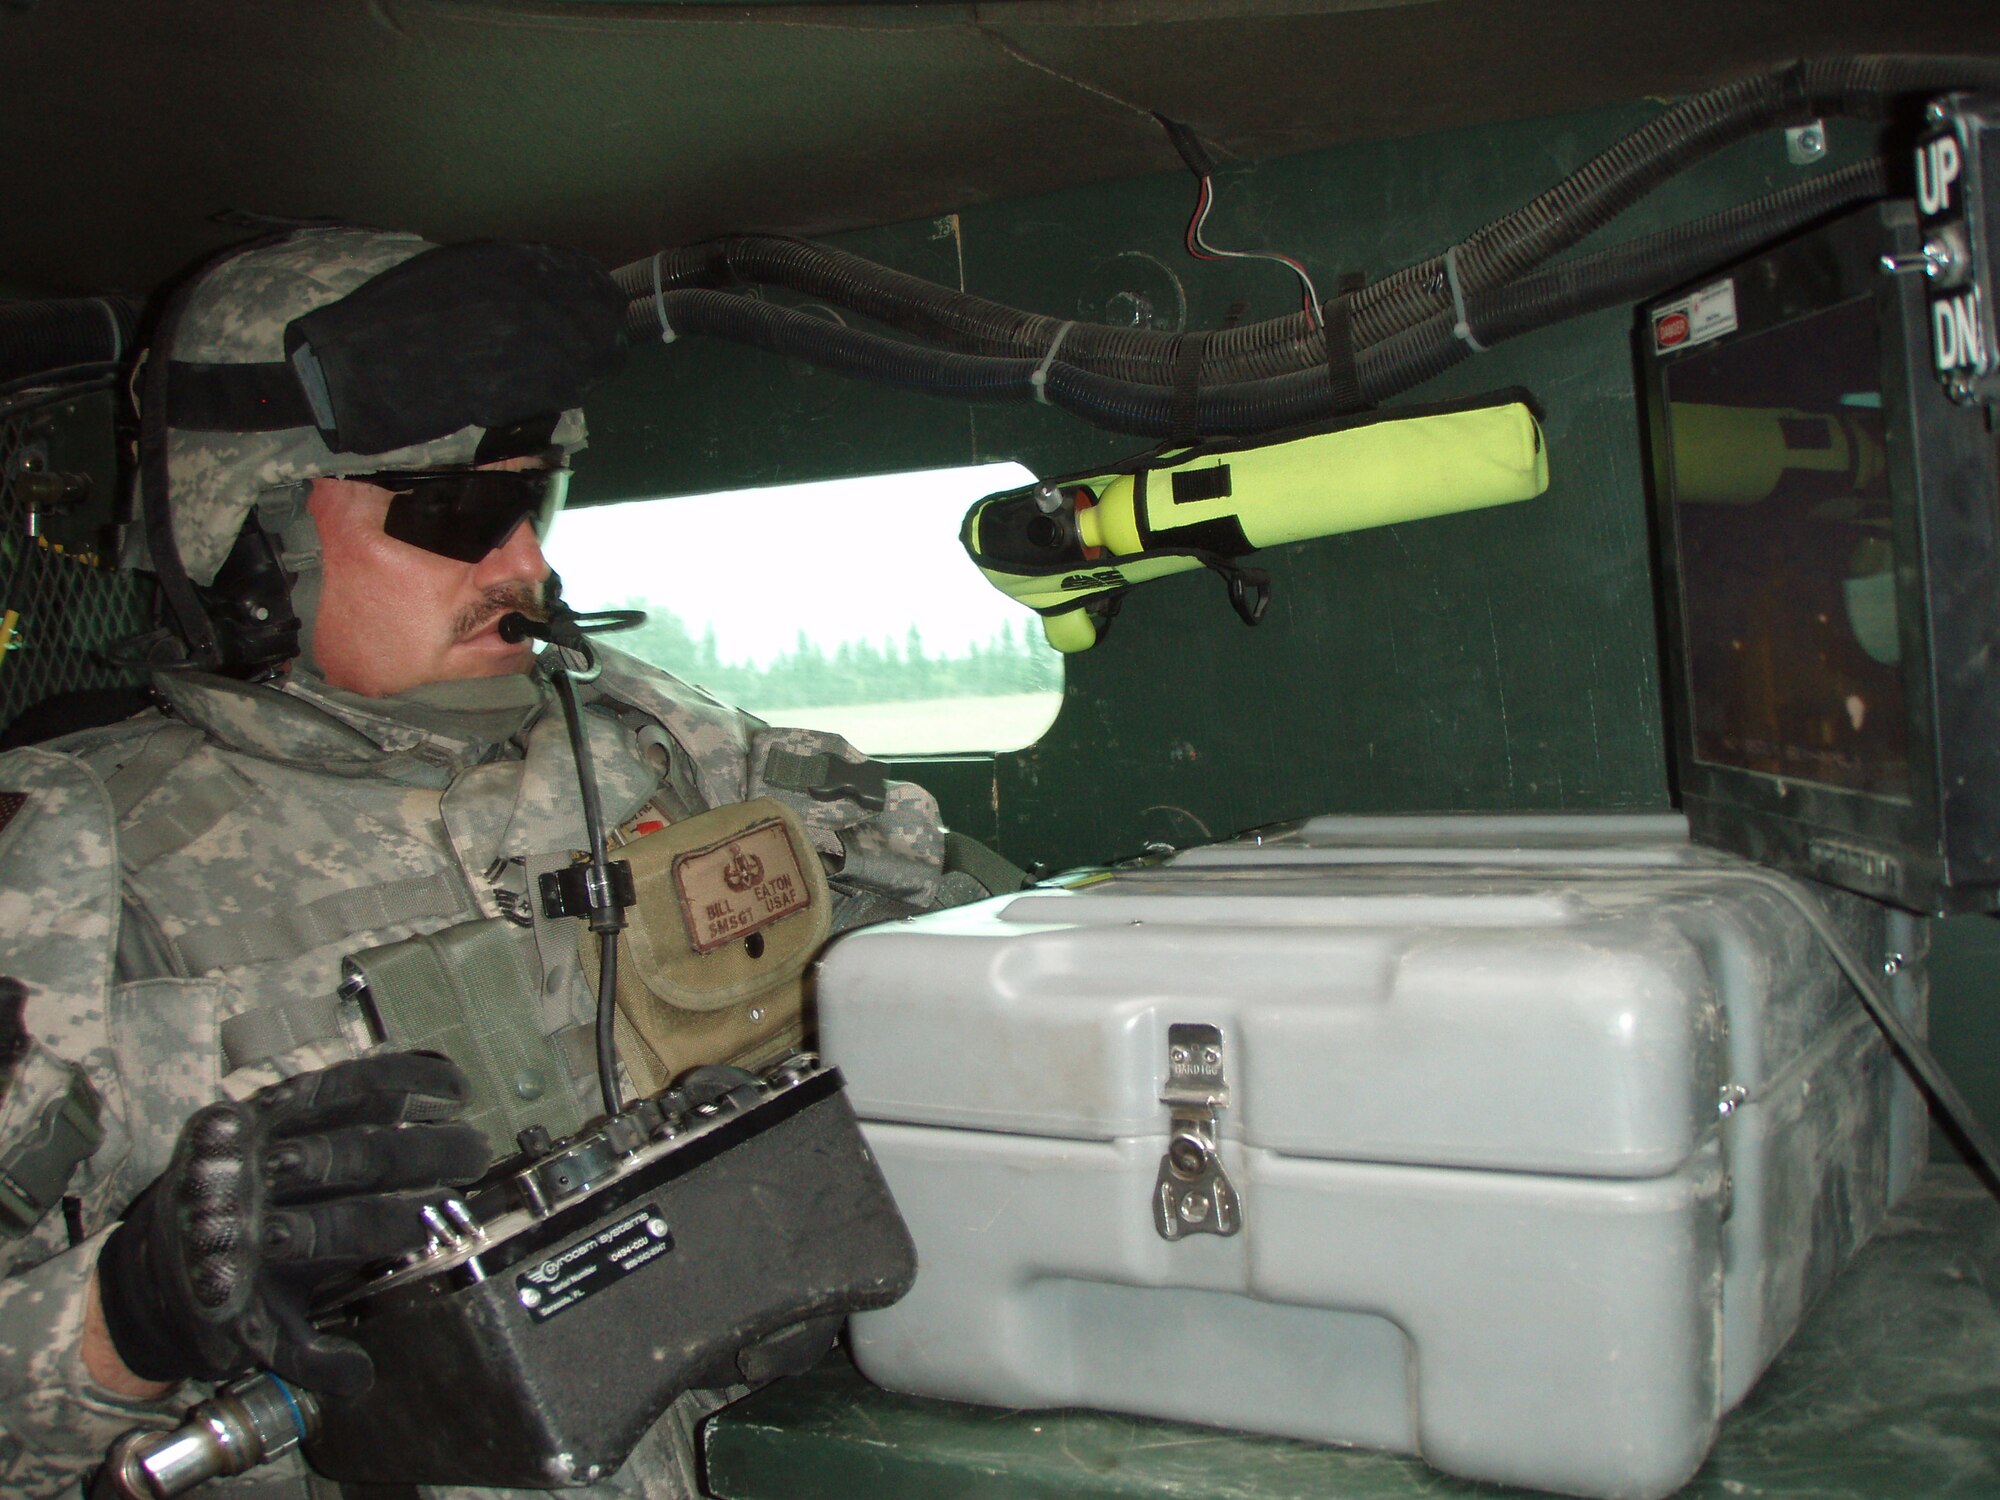 Senior Master Sgt. William Eaton, 39th Civil Engineer Squadron explosive ordnance disposal superintendant, conducts operations while on deployment to Joint Base Balad, Iraq, In 2008.  Sergeant Eaton was awarded a Bronze Star in a ceremony June 2 for his work while deployed. (Courtesy Photo)